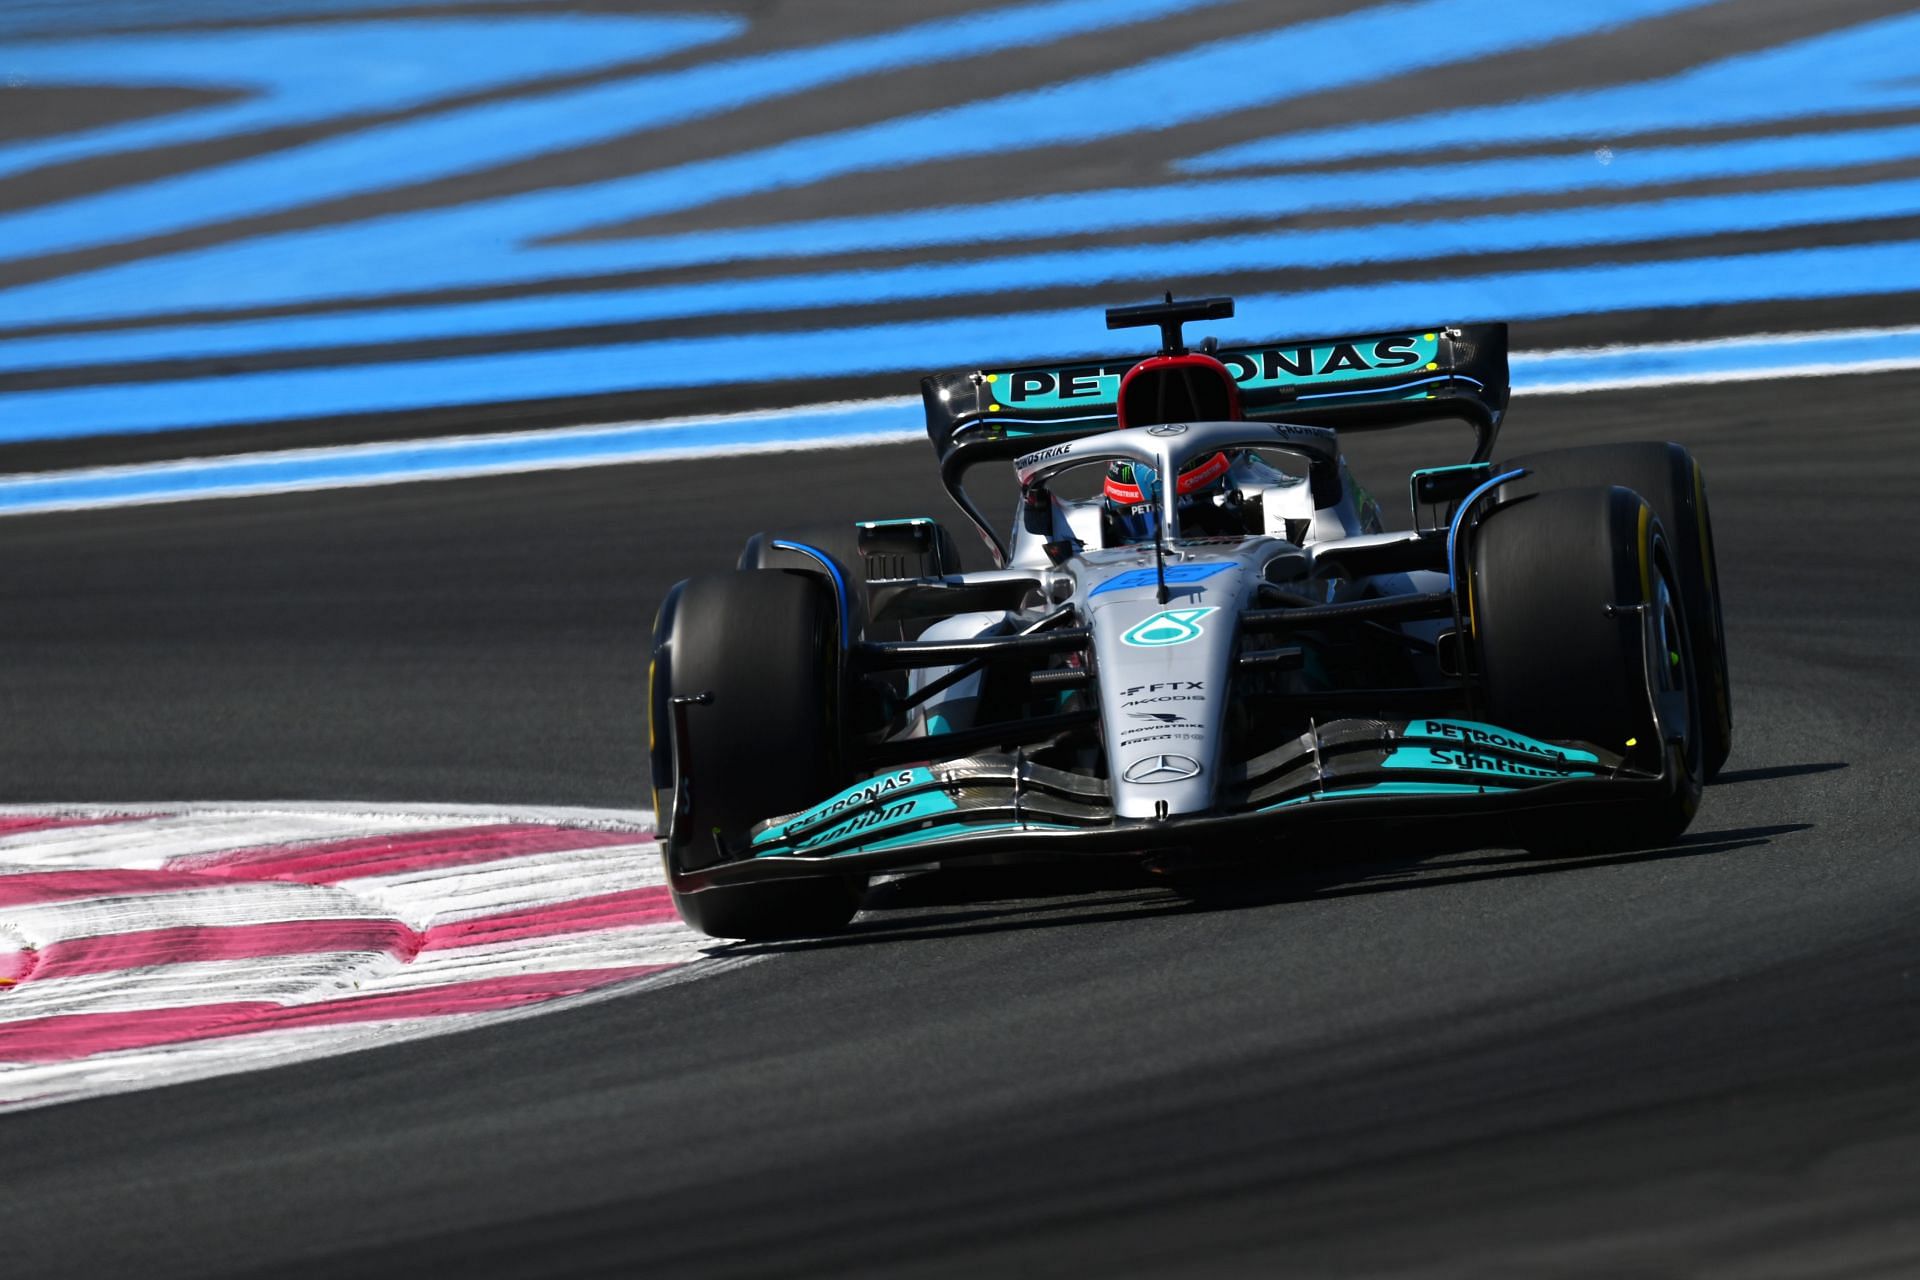 Mercedes driver George Russell in action during FP1 at the 2022 F1 French GP. (Photo by Dan Mullan/Getty Images)